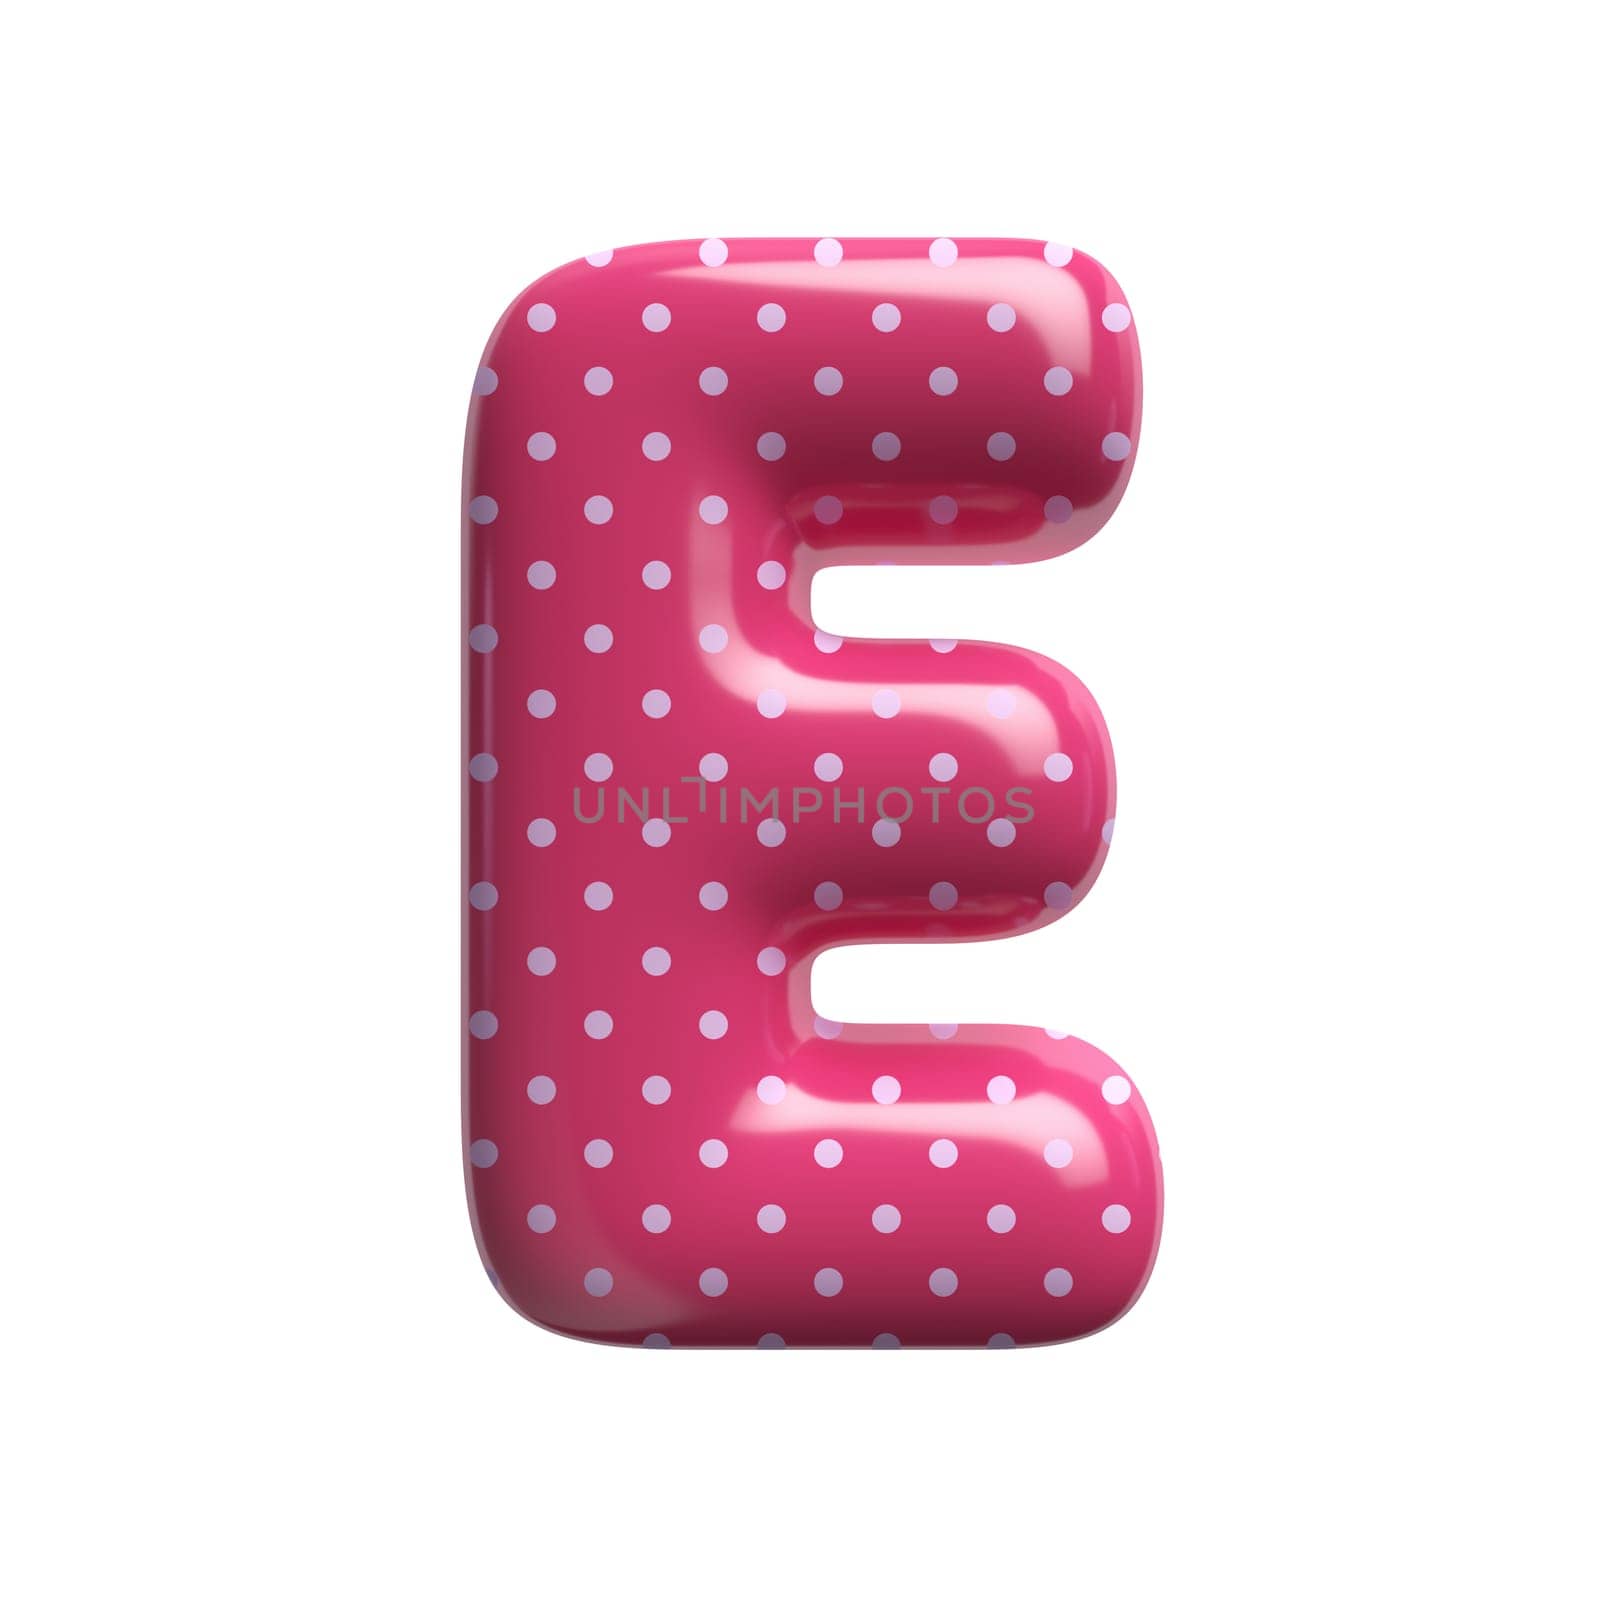 Polka dot letter E - large 3d pink retro font isolated on white background. This alphabet is perfect for creative illustrations related but not limited to Fashion, retro design, decoration...